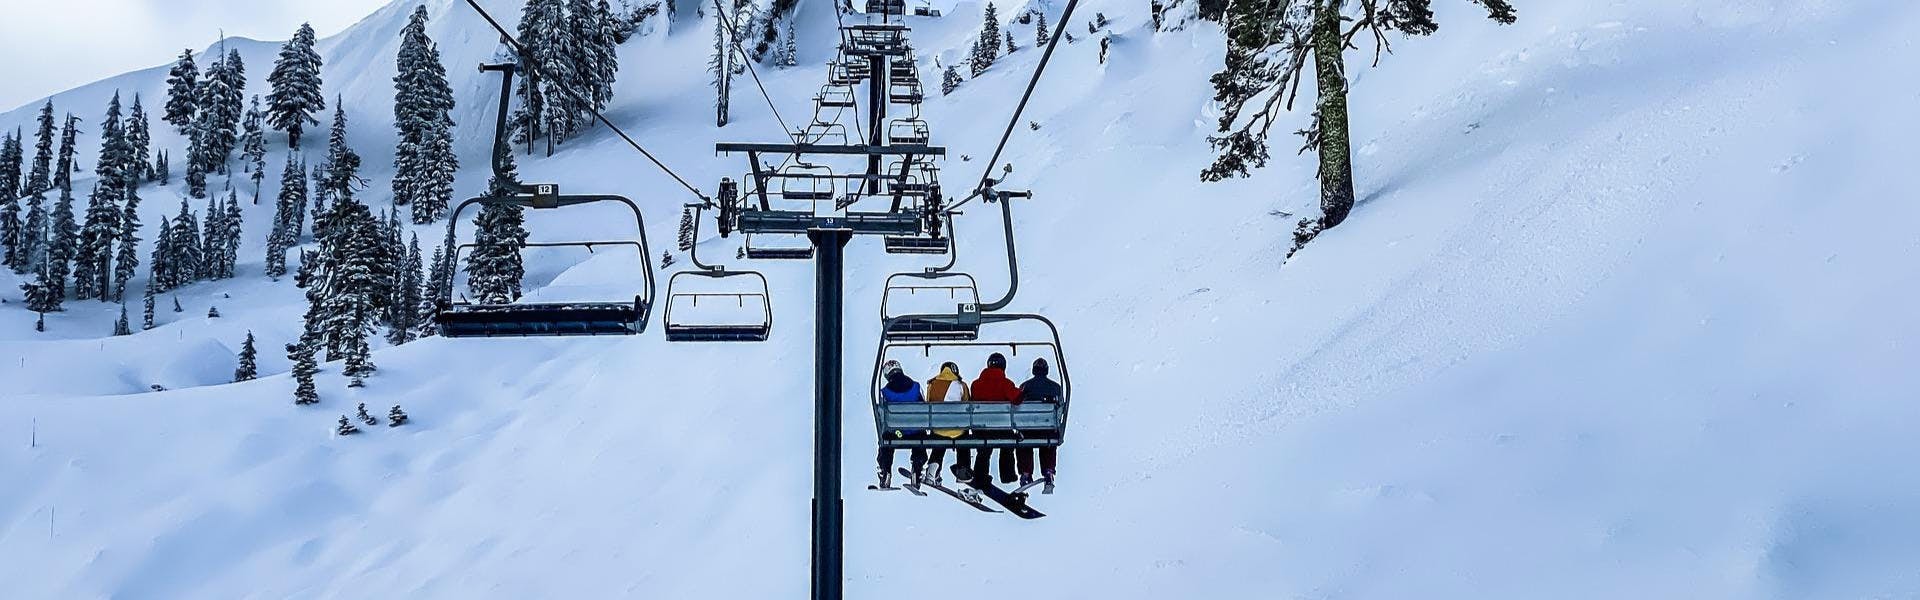 Snowboarders and skier sit on a chairlift.